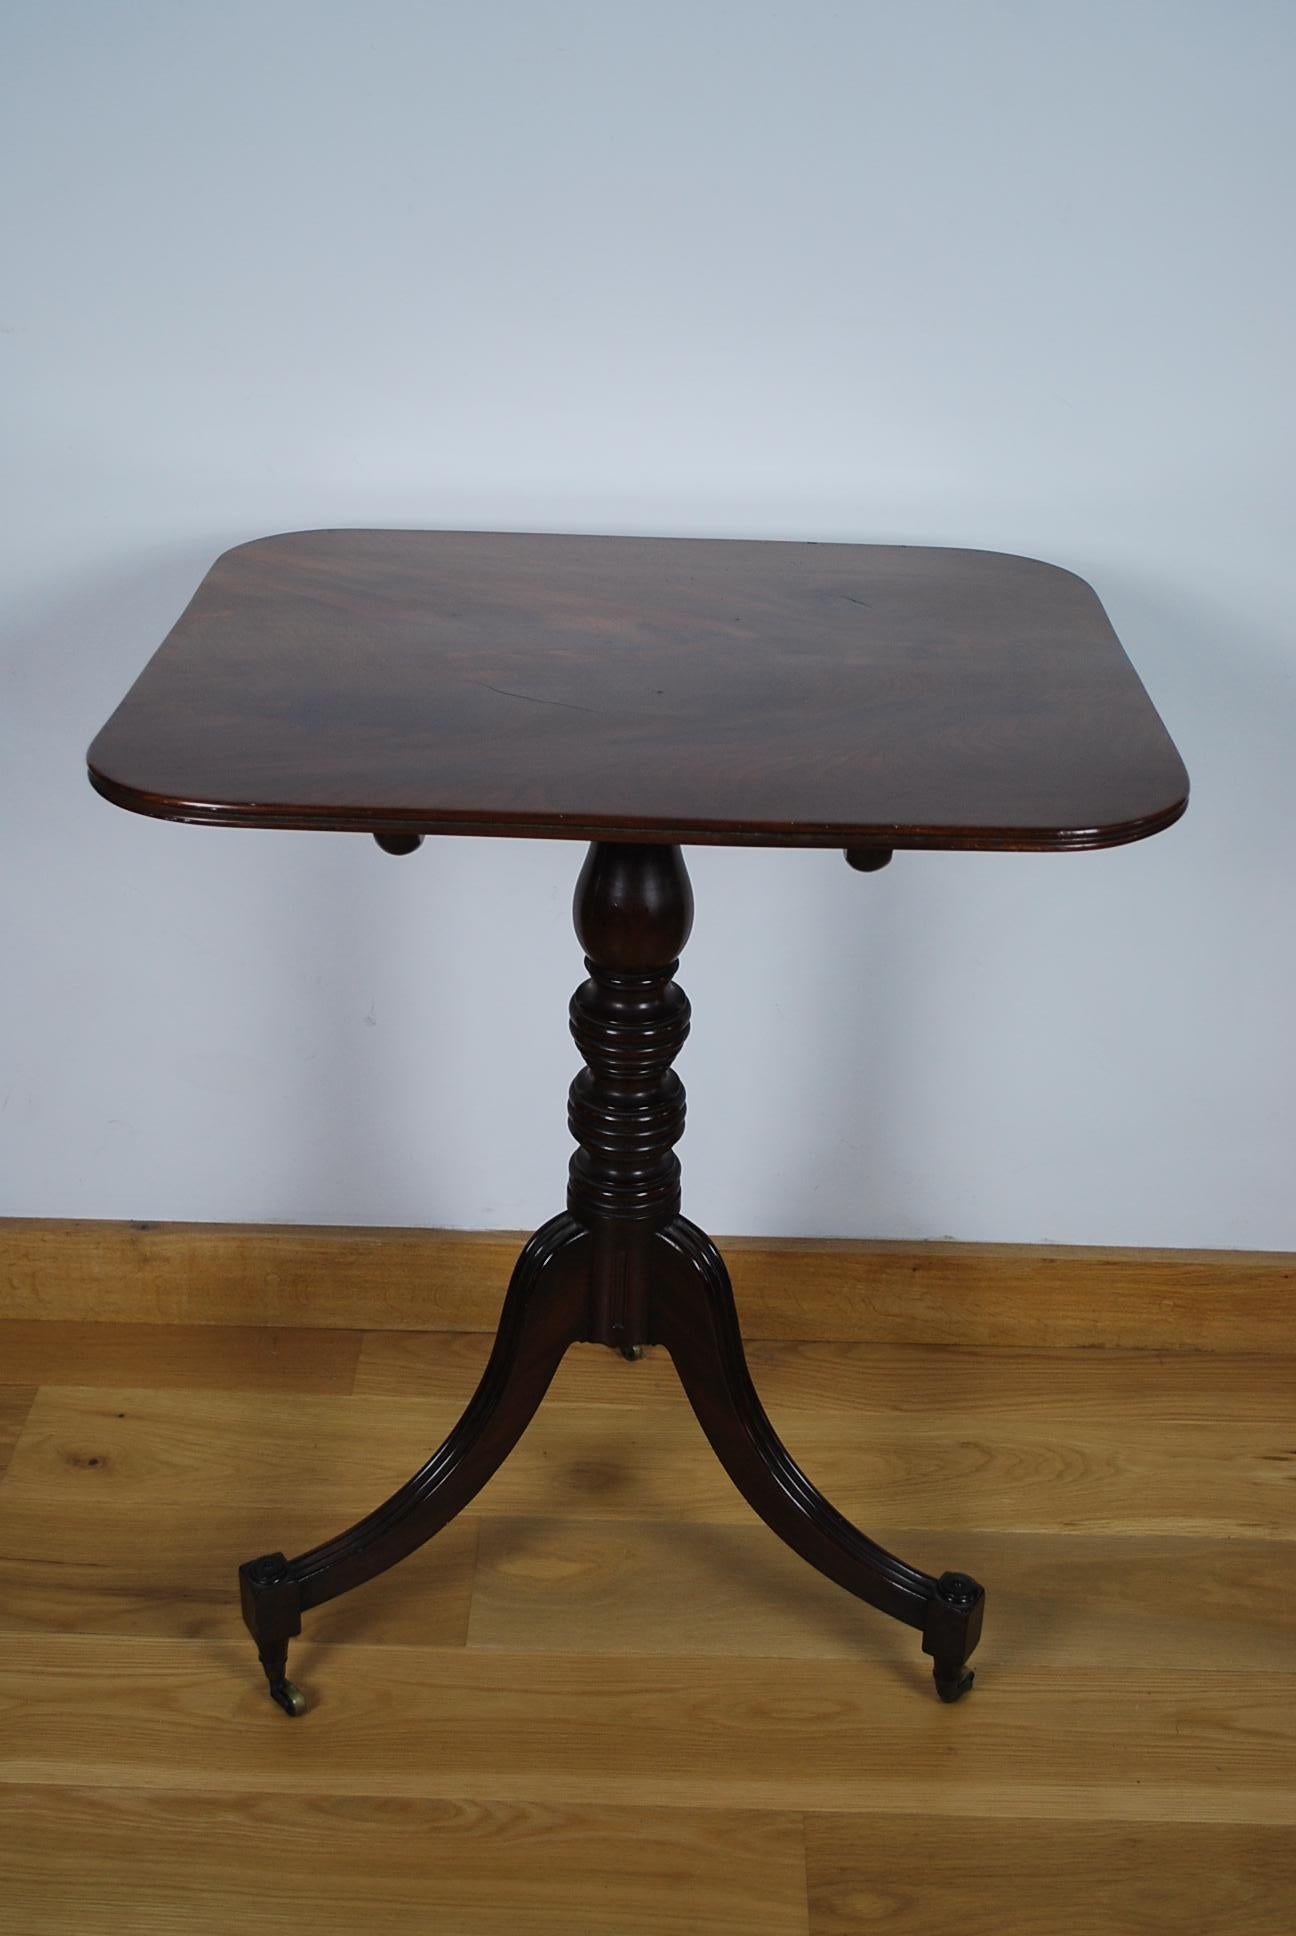 This is a very fine quality Georgian antique mahogany tripod table with rectangular top. It has out swept legs and turned feet standing on brass castors.